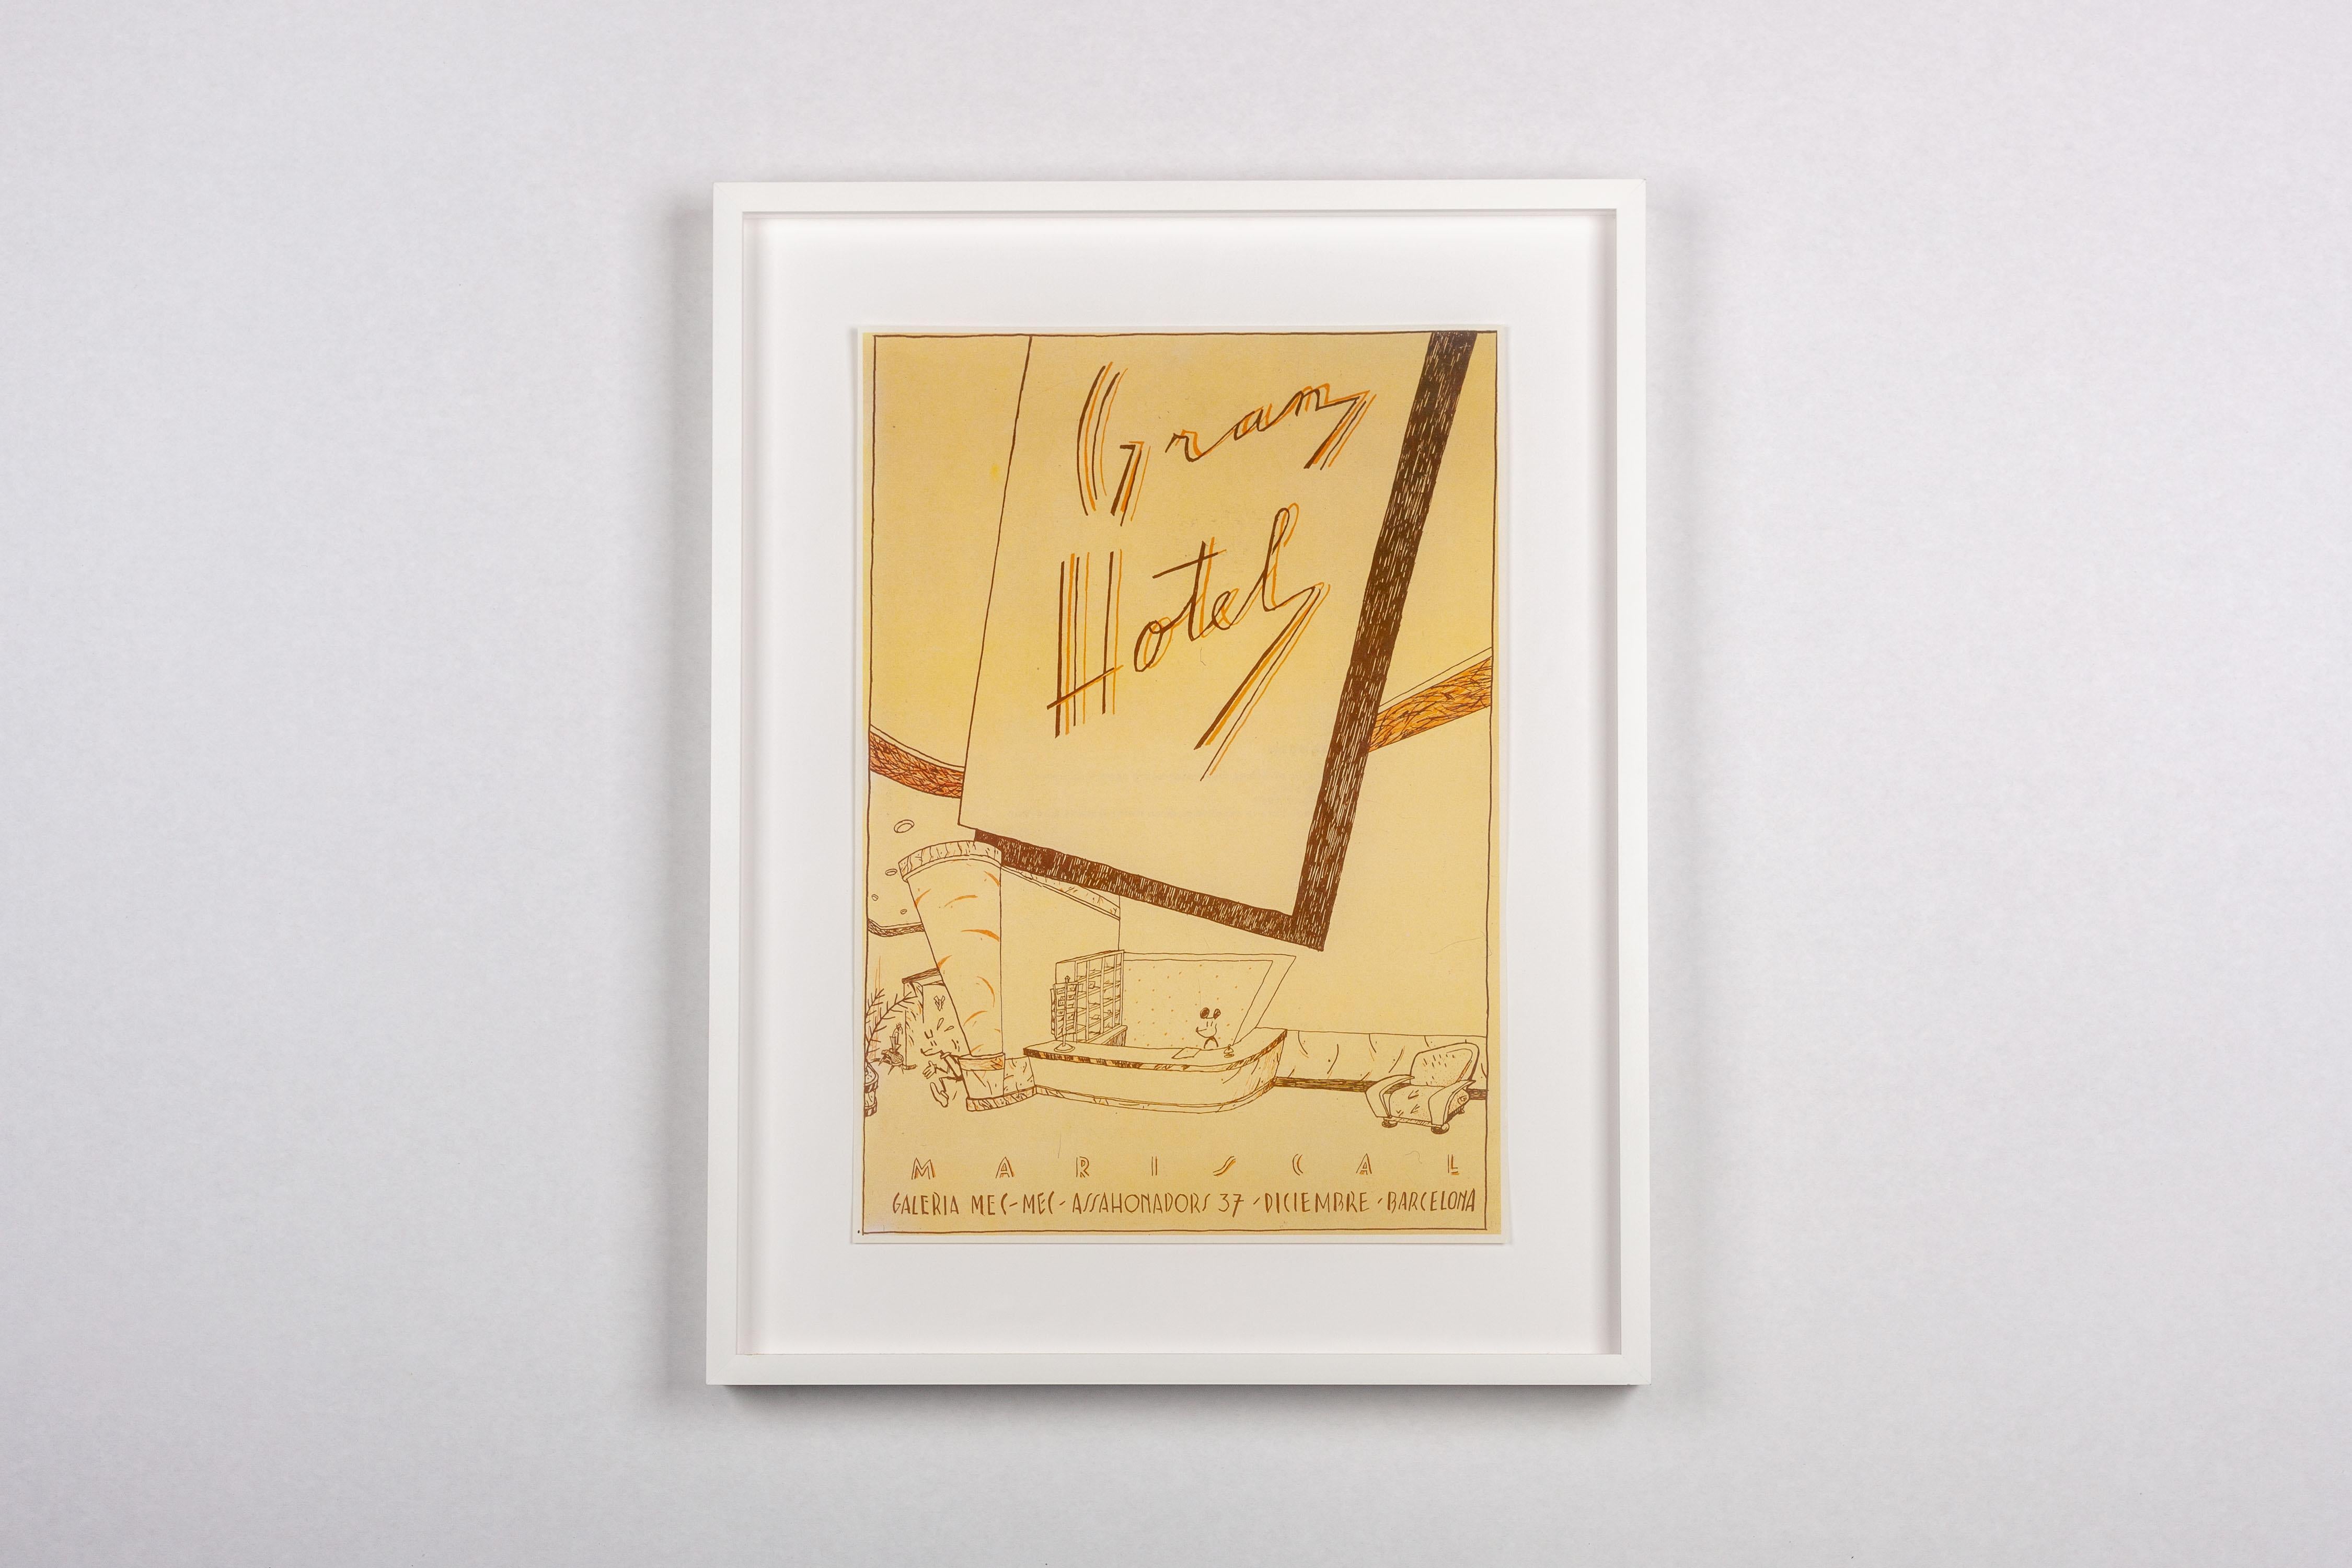 Spanish “Grand Hotel” Javier Mariscal 1977 first solo exhibition poster, 1980s re-print For Sale